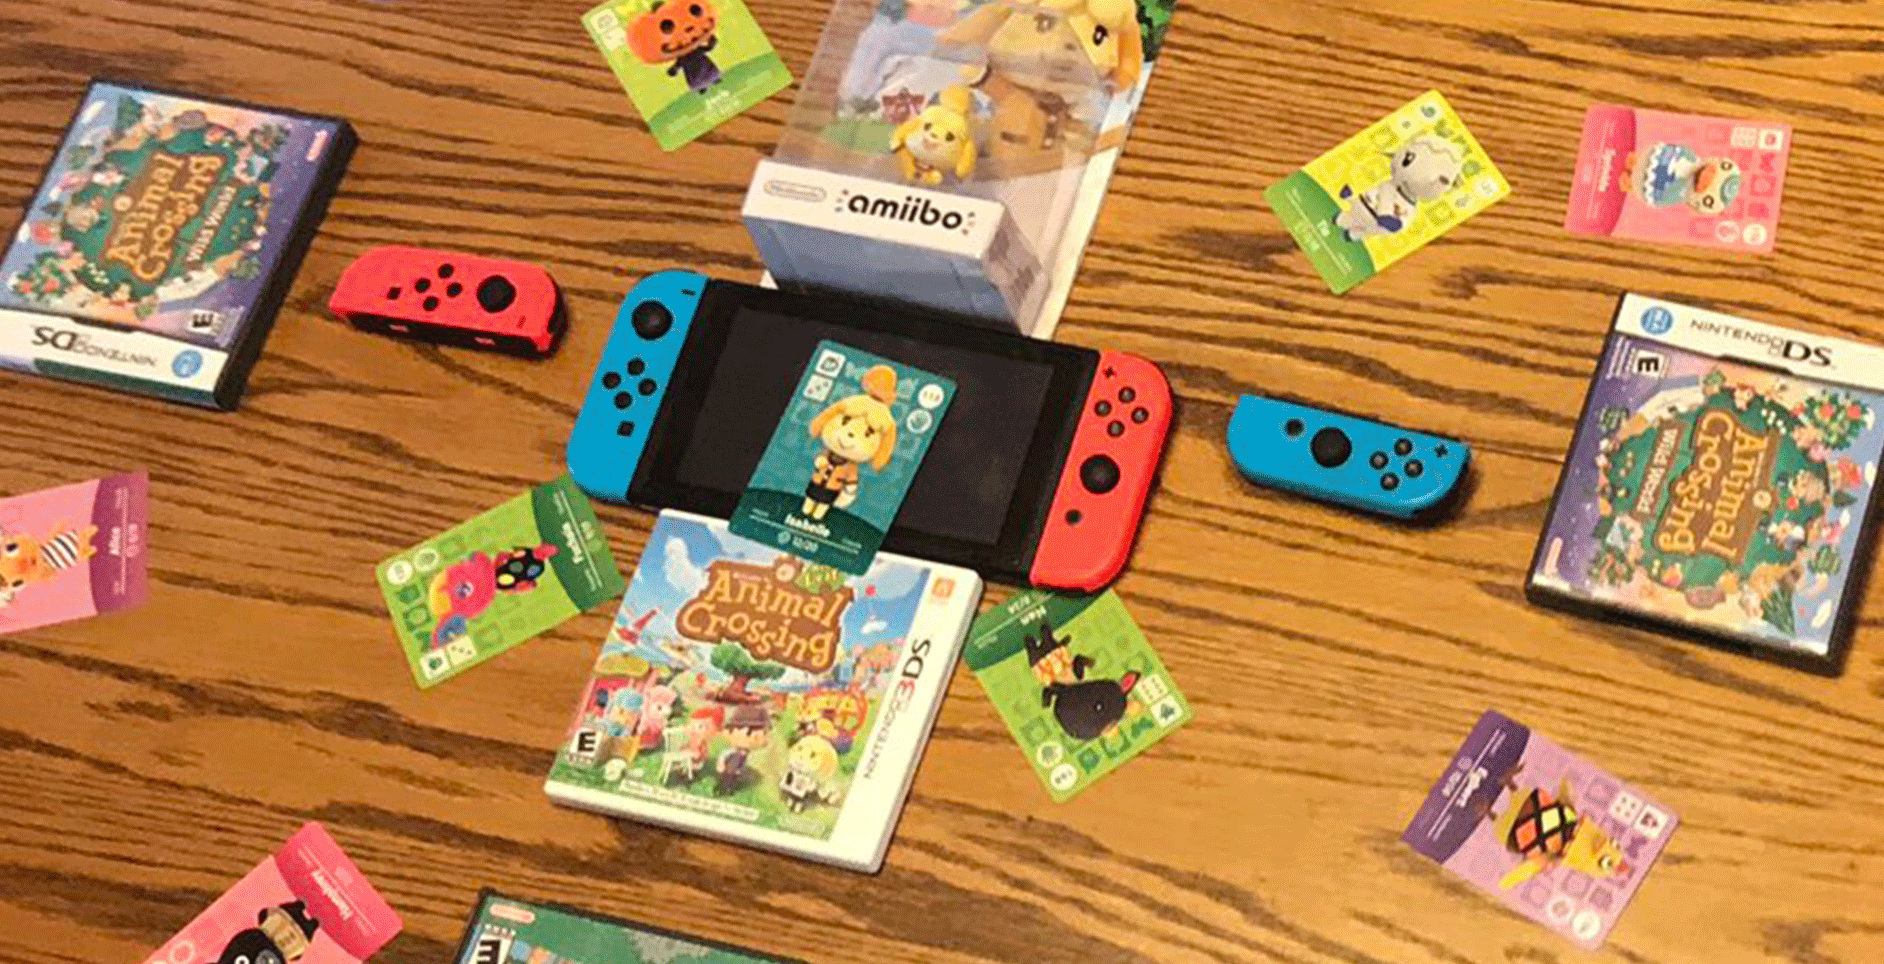 does the animal crossing nintendo switch come with the game